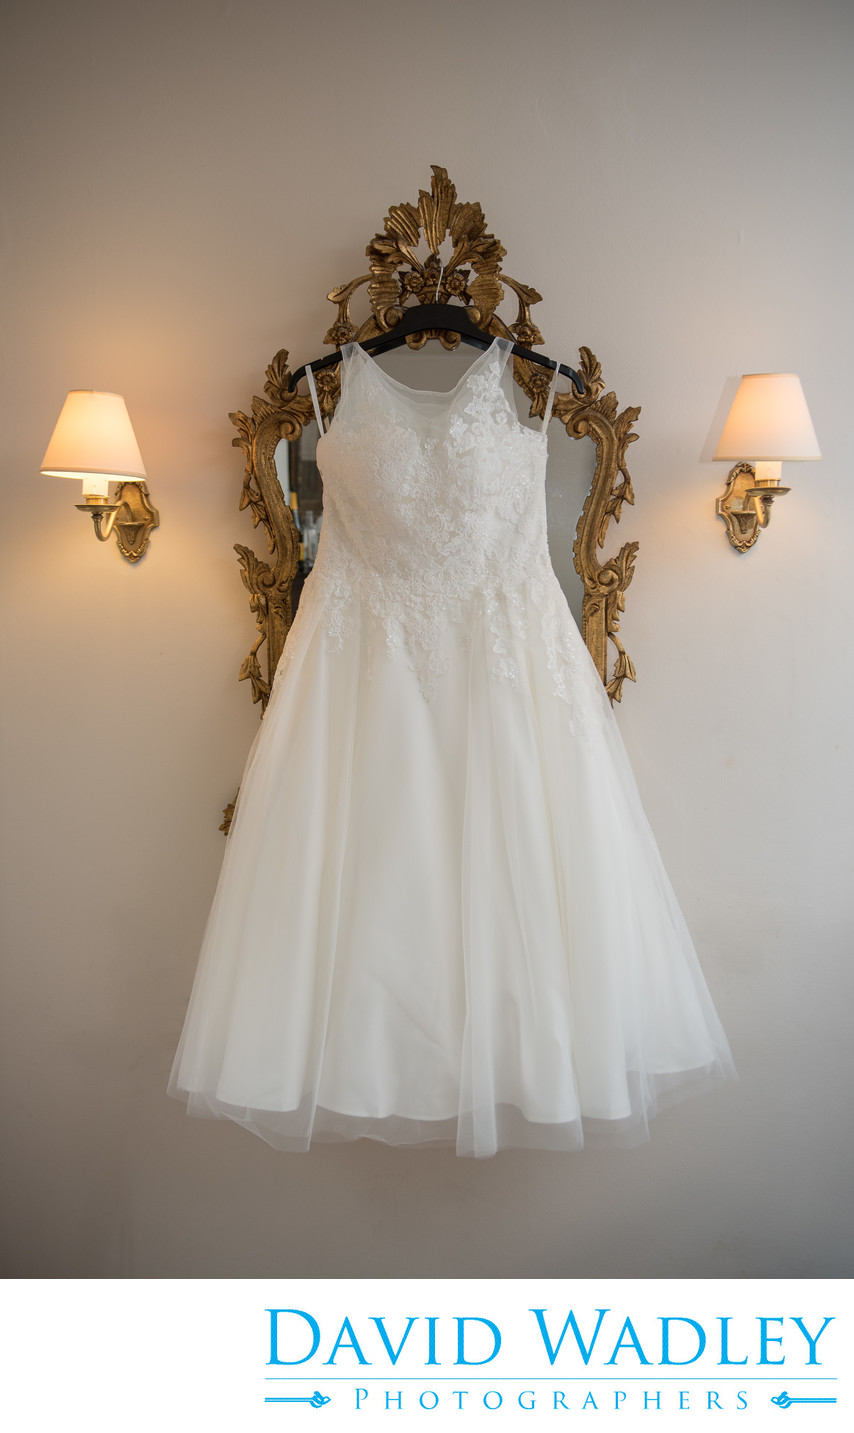 Wedding dress photographed at New Hall Hotel Sutton Coldfield.